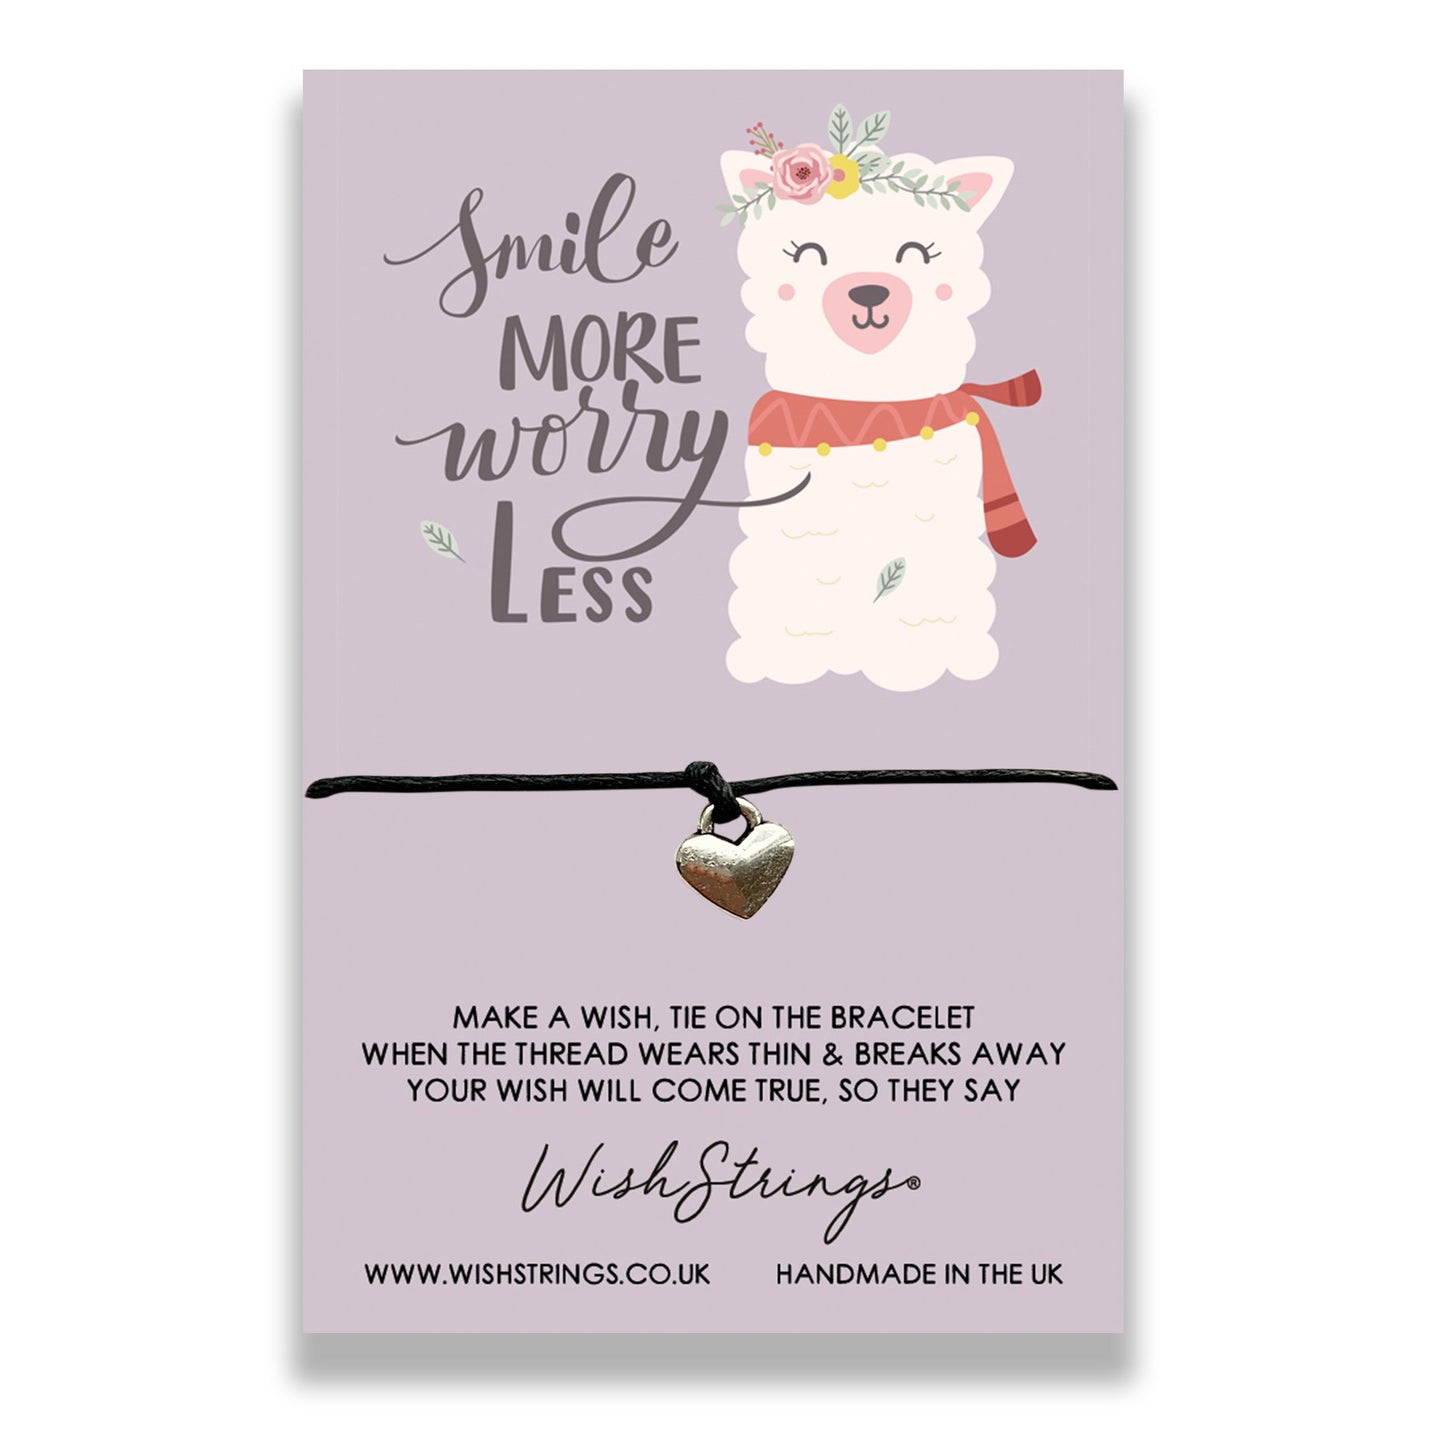 Smile More Worry Less Wish String Bracelet With Lucky Charm